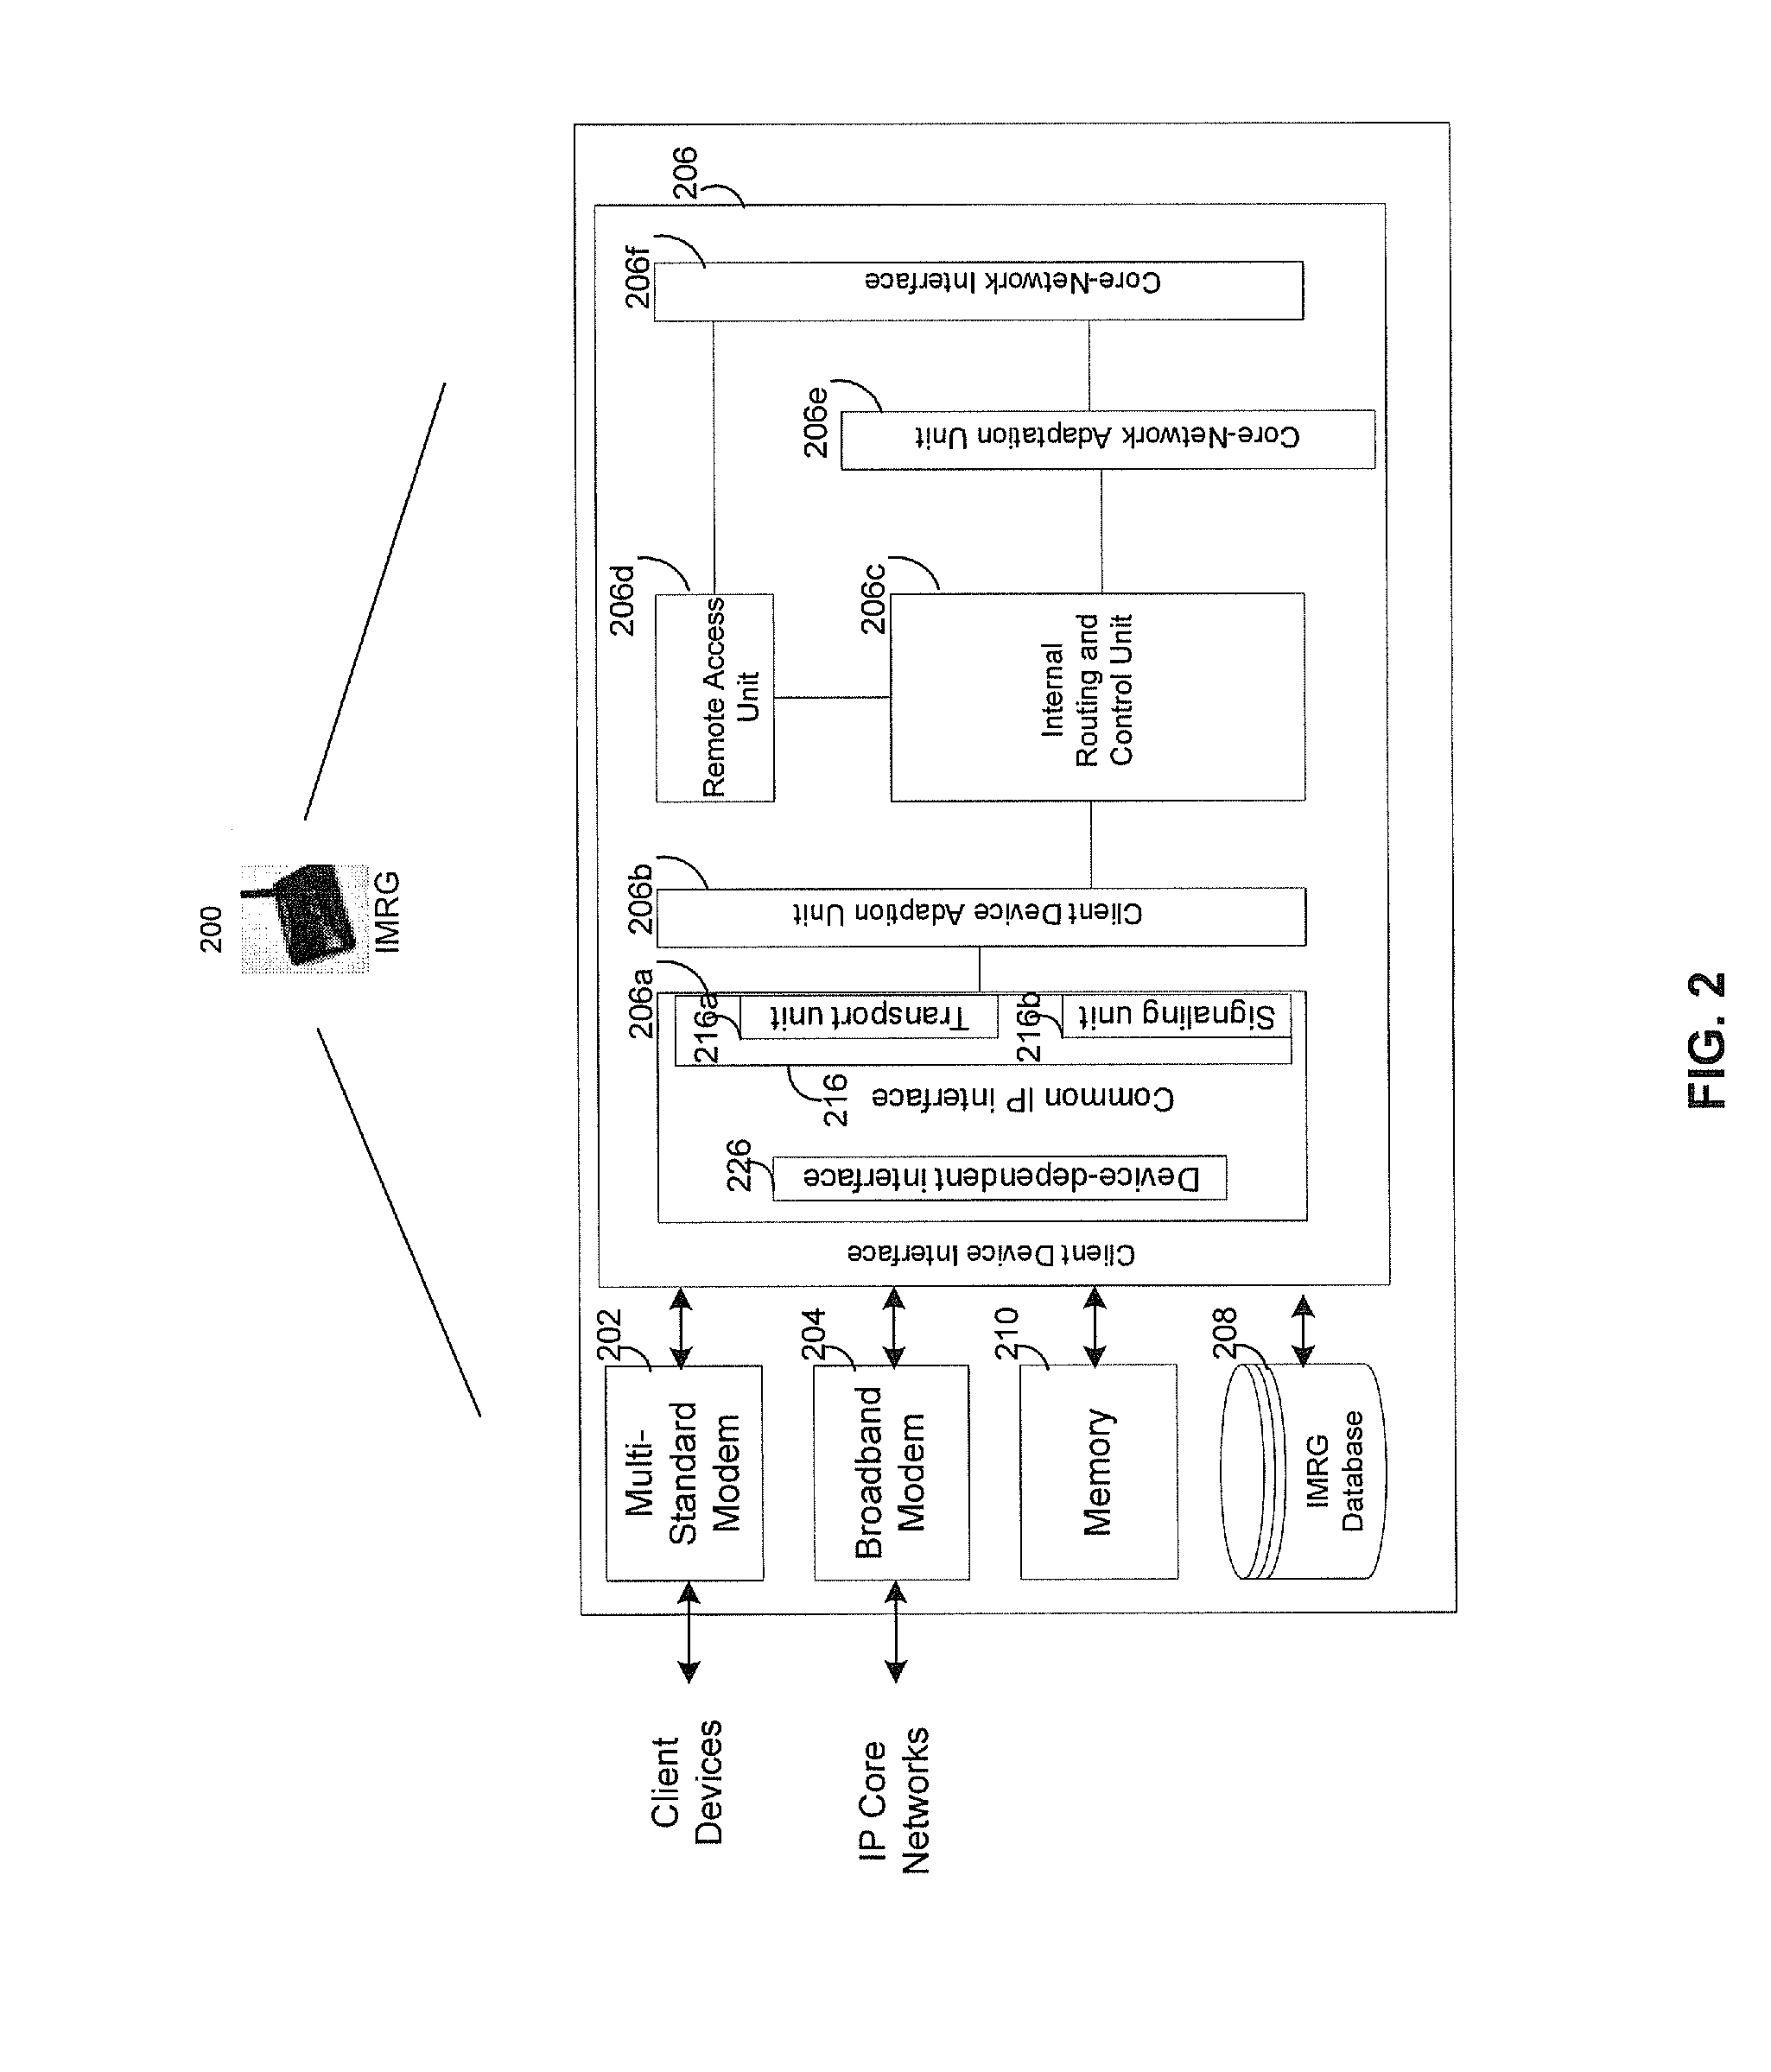 Method and system for prioritizing and scheduling services in an IP multimedia network